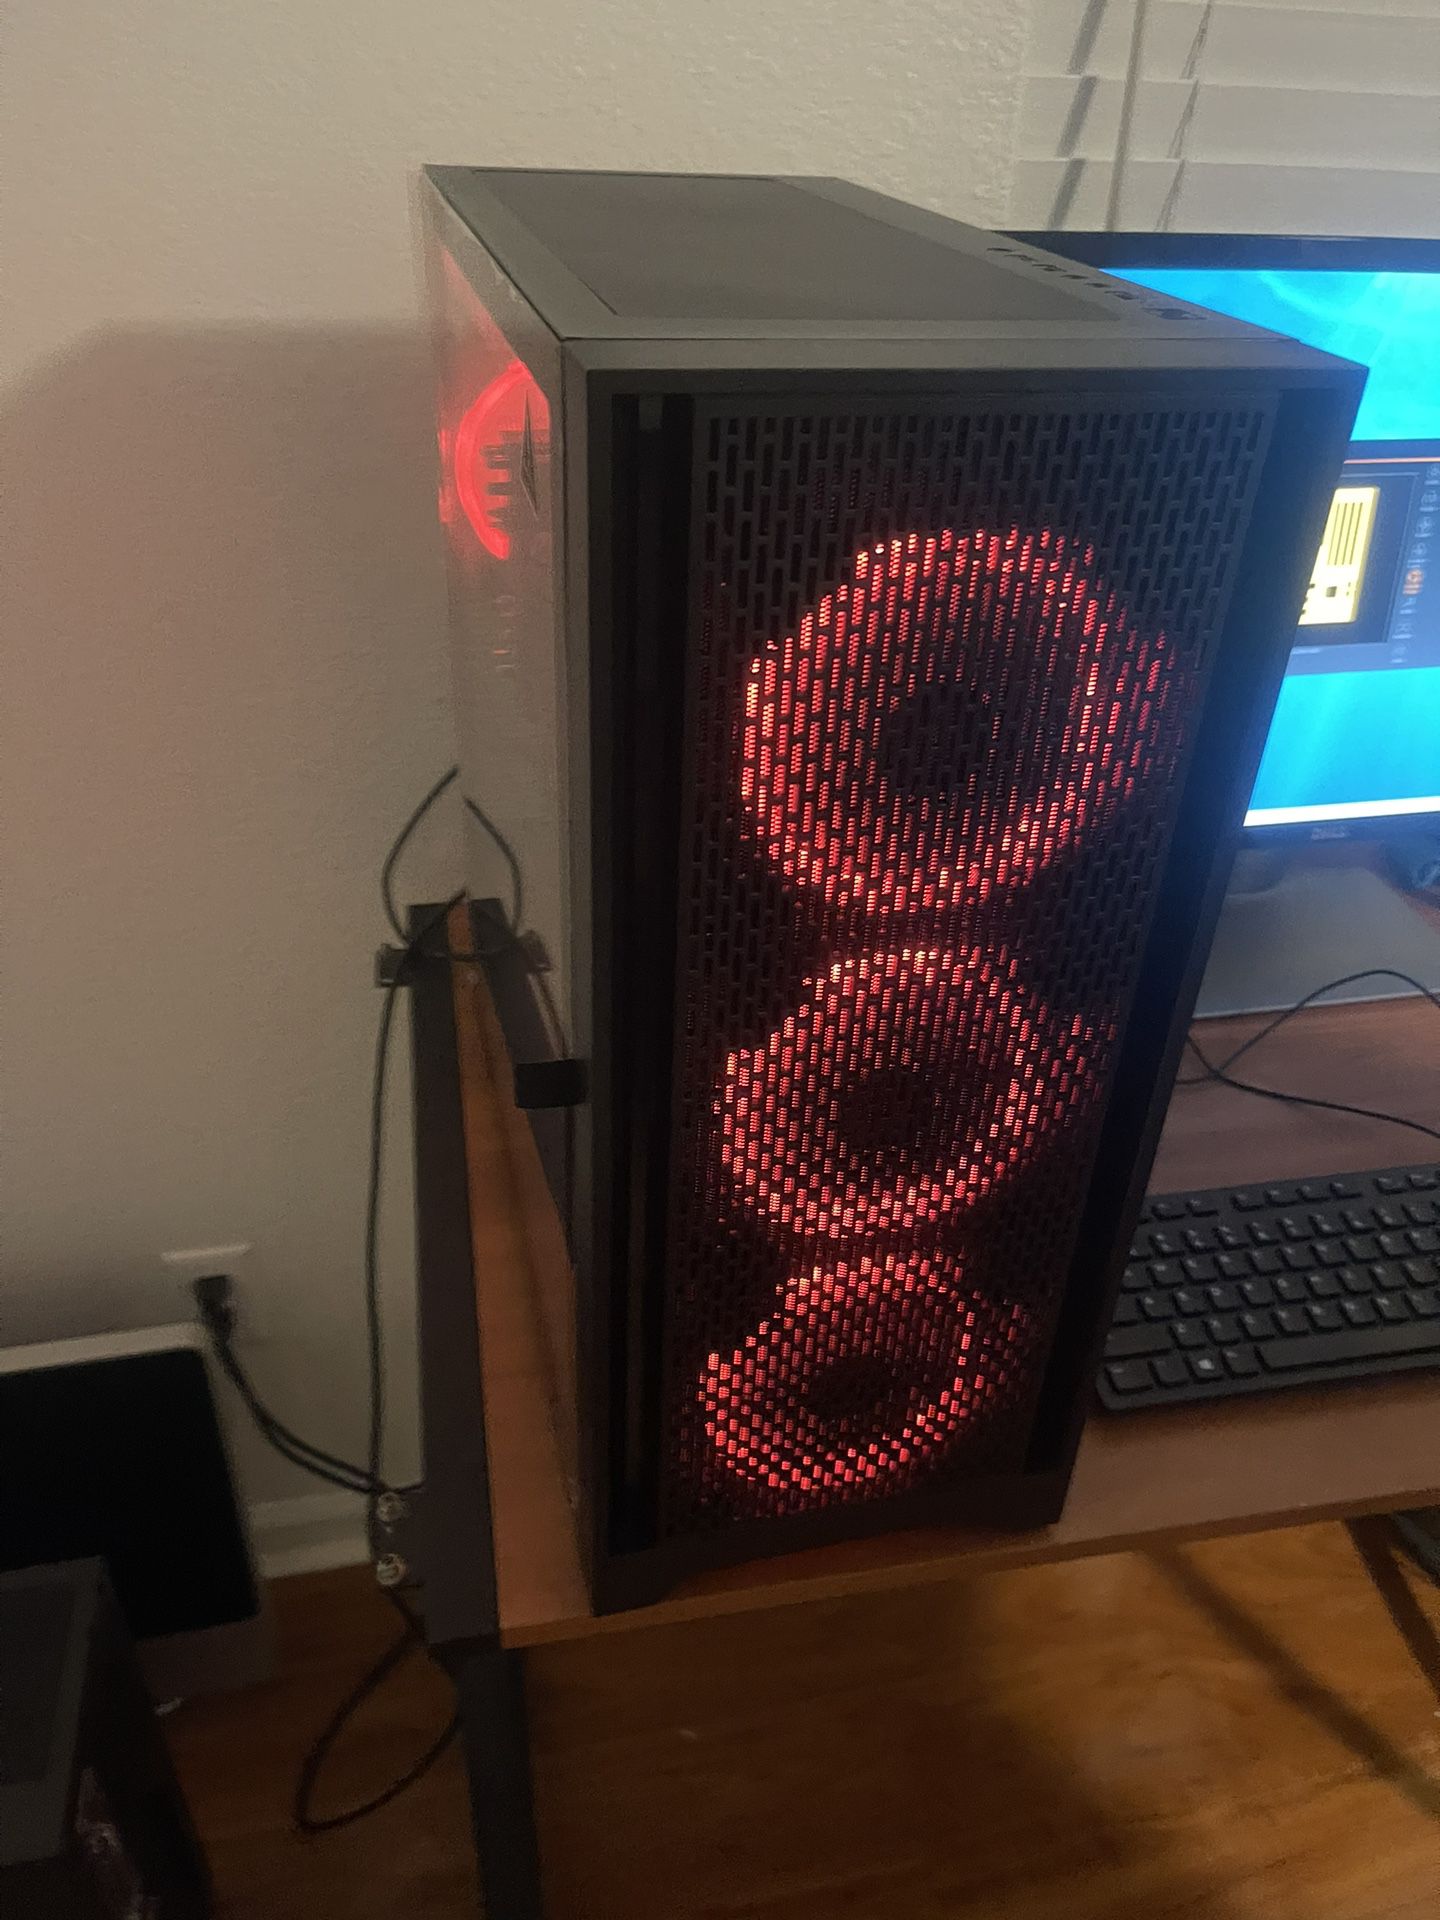 Gaming Computers AMD Ryzen 7 , 16gb Ram, 256gb SSD+1TB HDD, Radeon Red Devil 8GB Graphics,Windows 10 , Wi-Fi. Comes with Monitor Keyboard and Mo